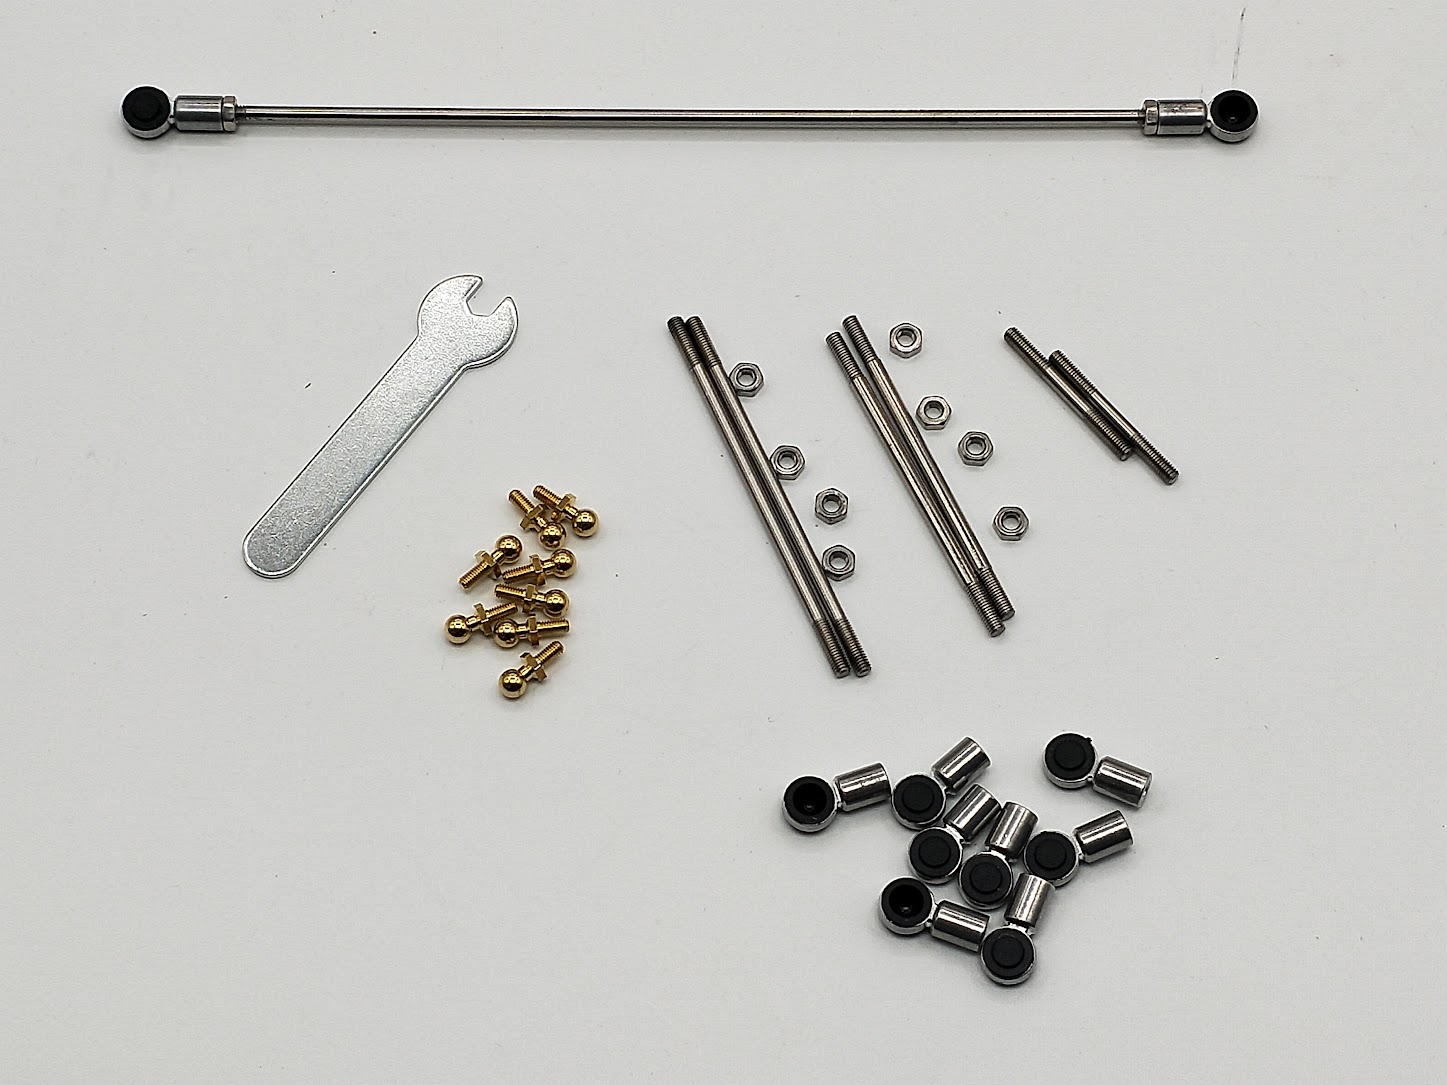 6.Kyosho TURBO SCORPION Stainless steel Tie rod and steering linkage rod set.